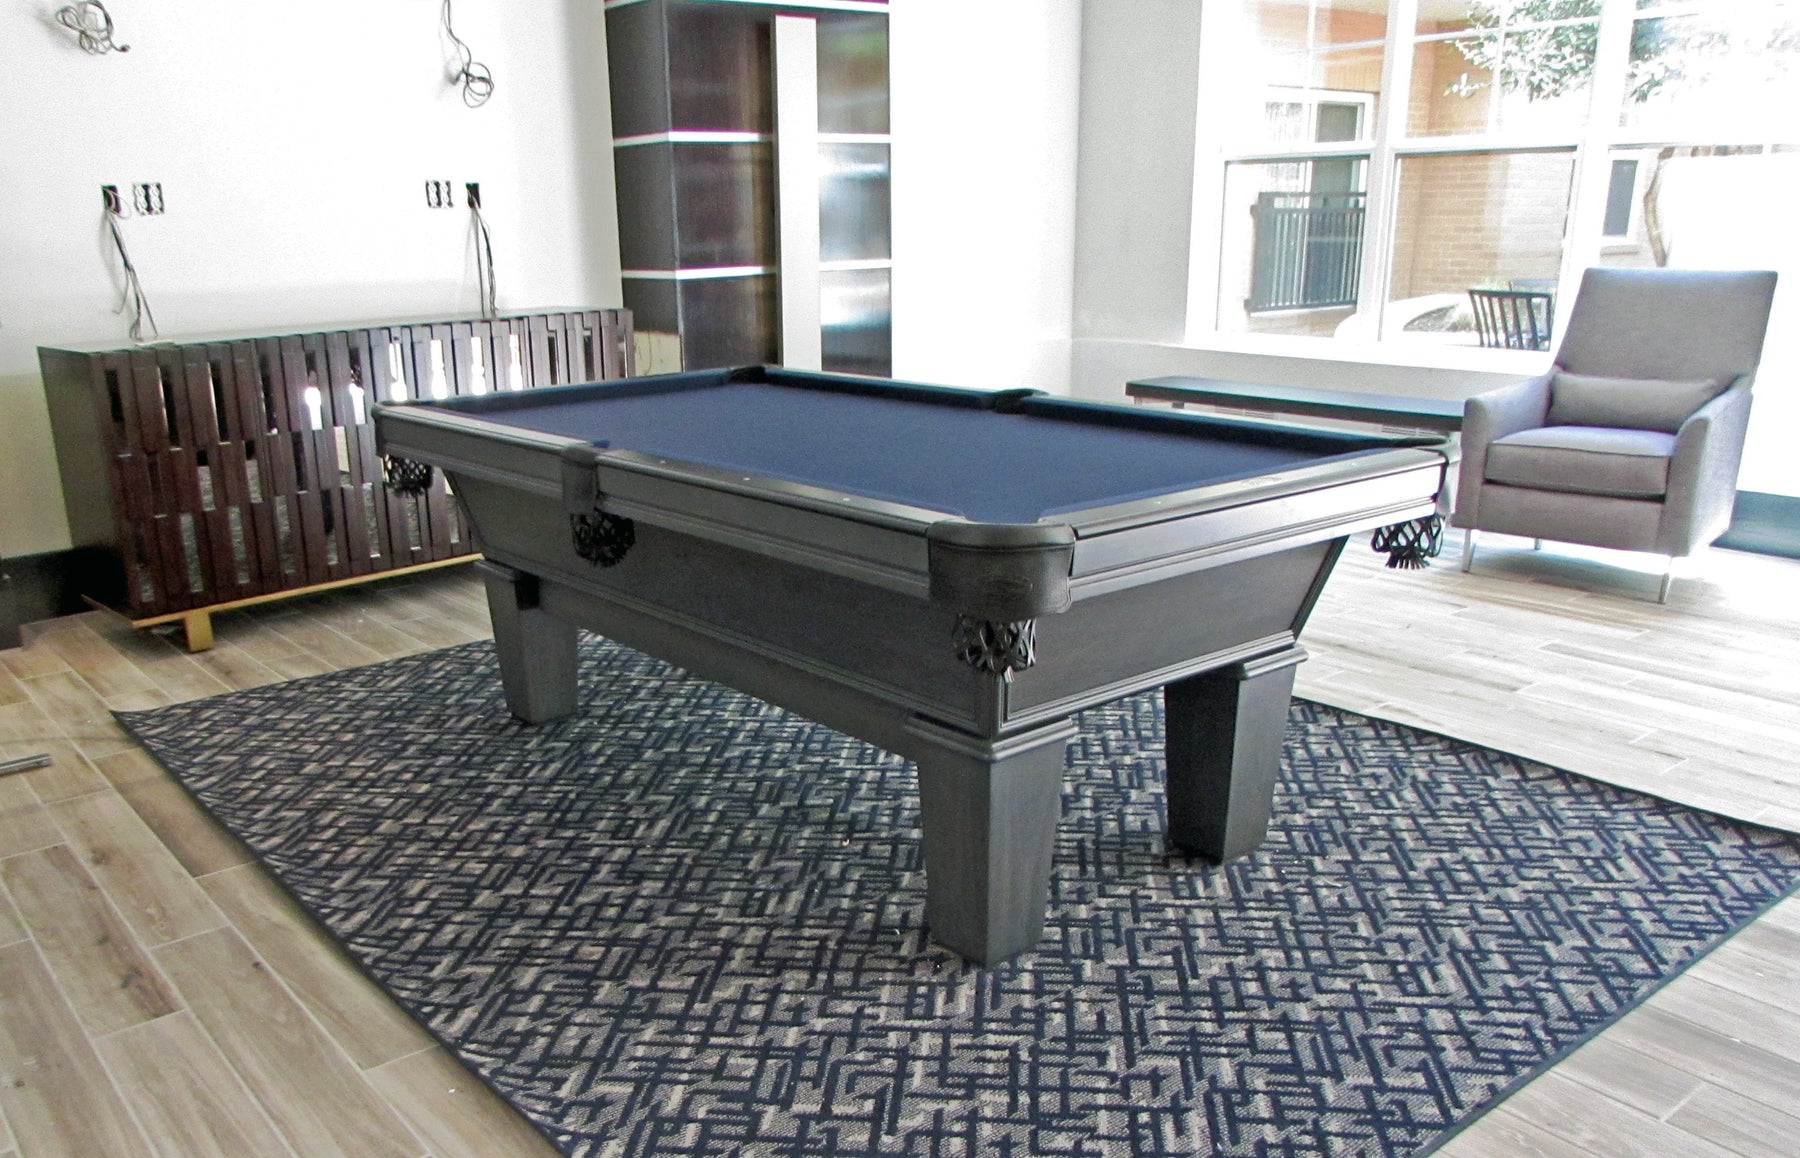 Olhausen Classic Pool Table installed in Alexandria Virginia